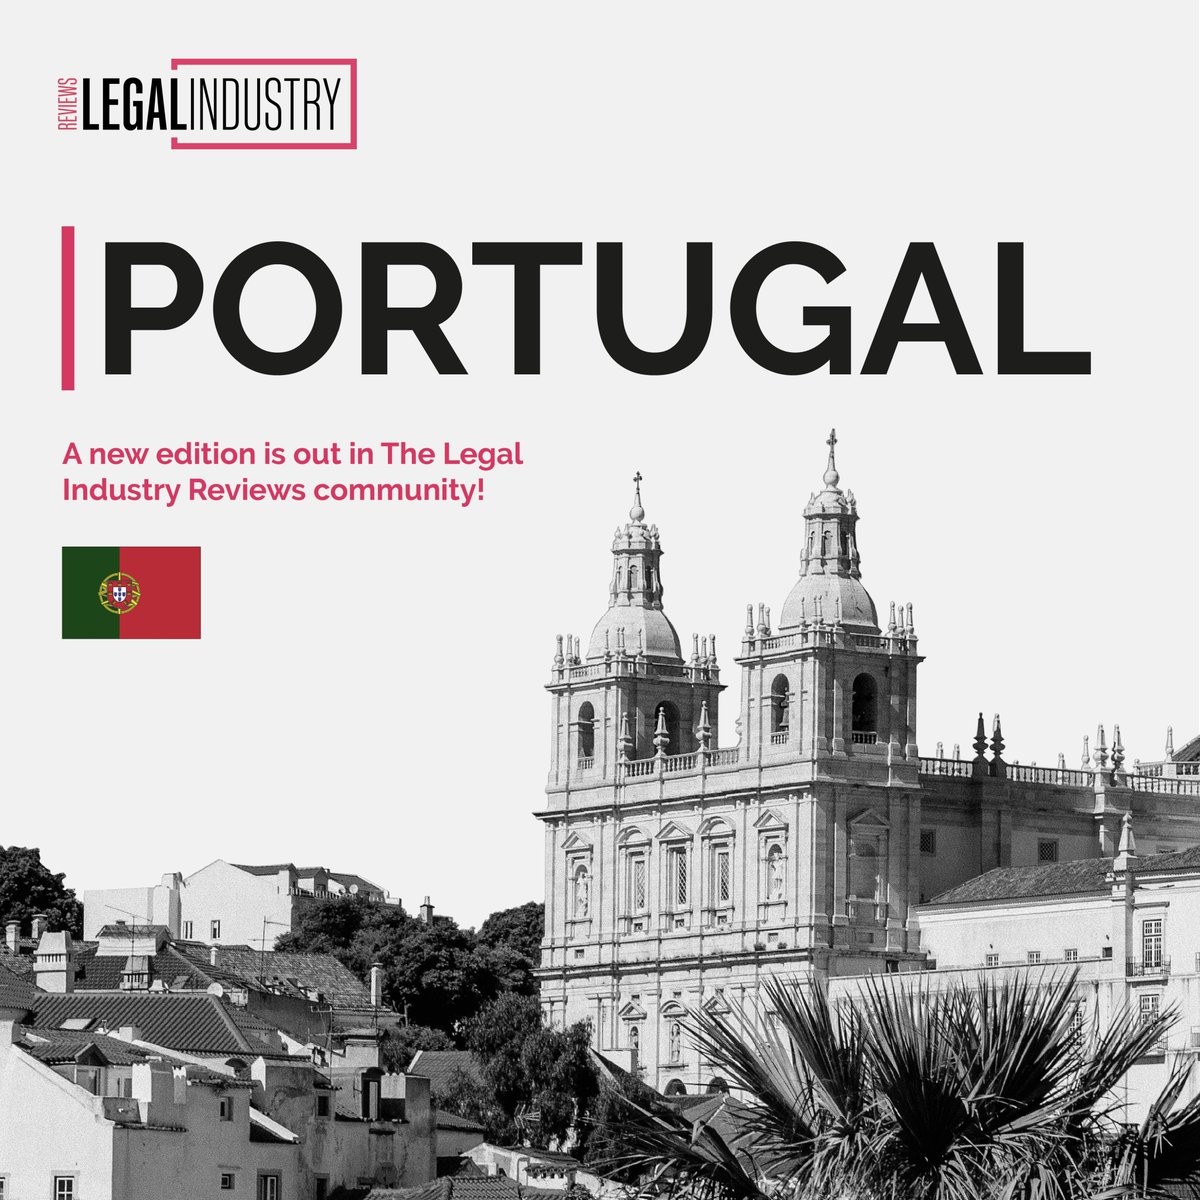 🇵🇹 We are pleased to present to the legal community the first edition of The Legal Industry Reviews Portugal!

📊 In this brand-new edition, you will find Special Guests’ columns by Pedro Vale Gonçalves from @unbabel, Mariana Figueiredo from @eurowindenergy and Alice Khouri from